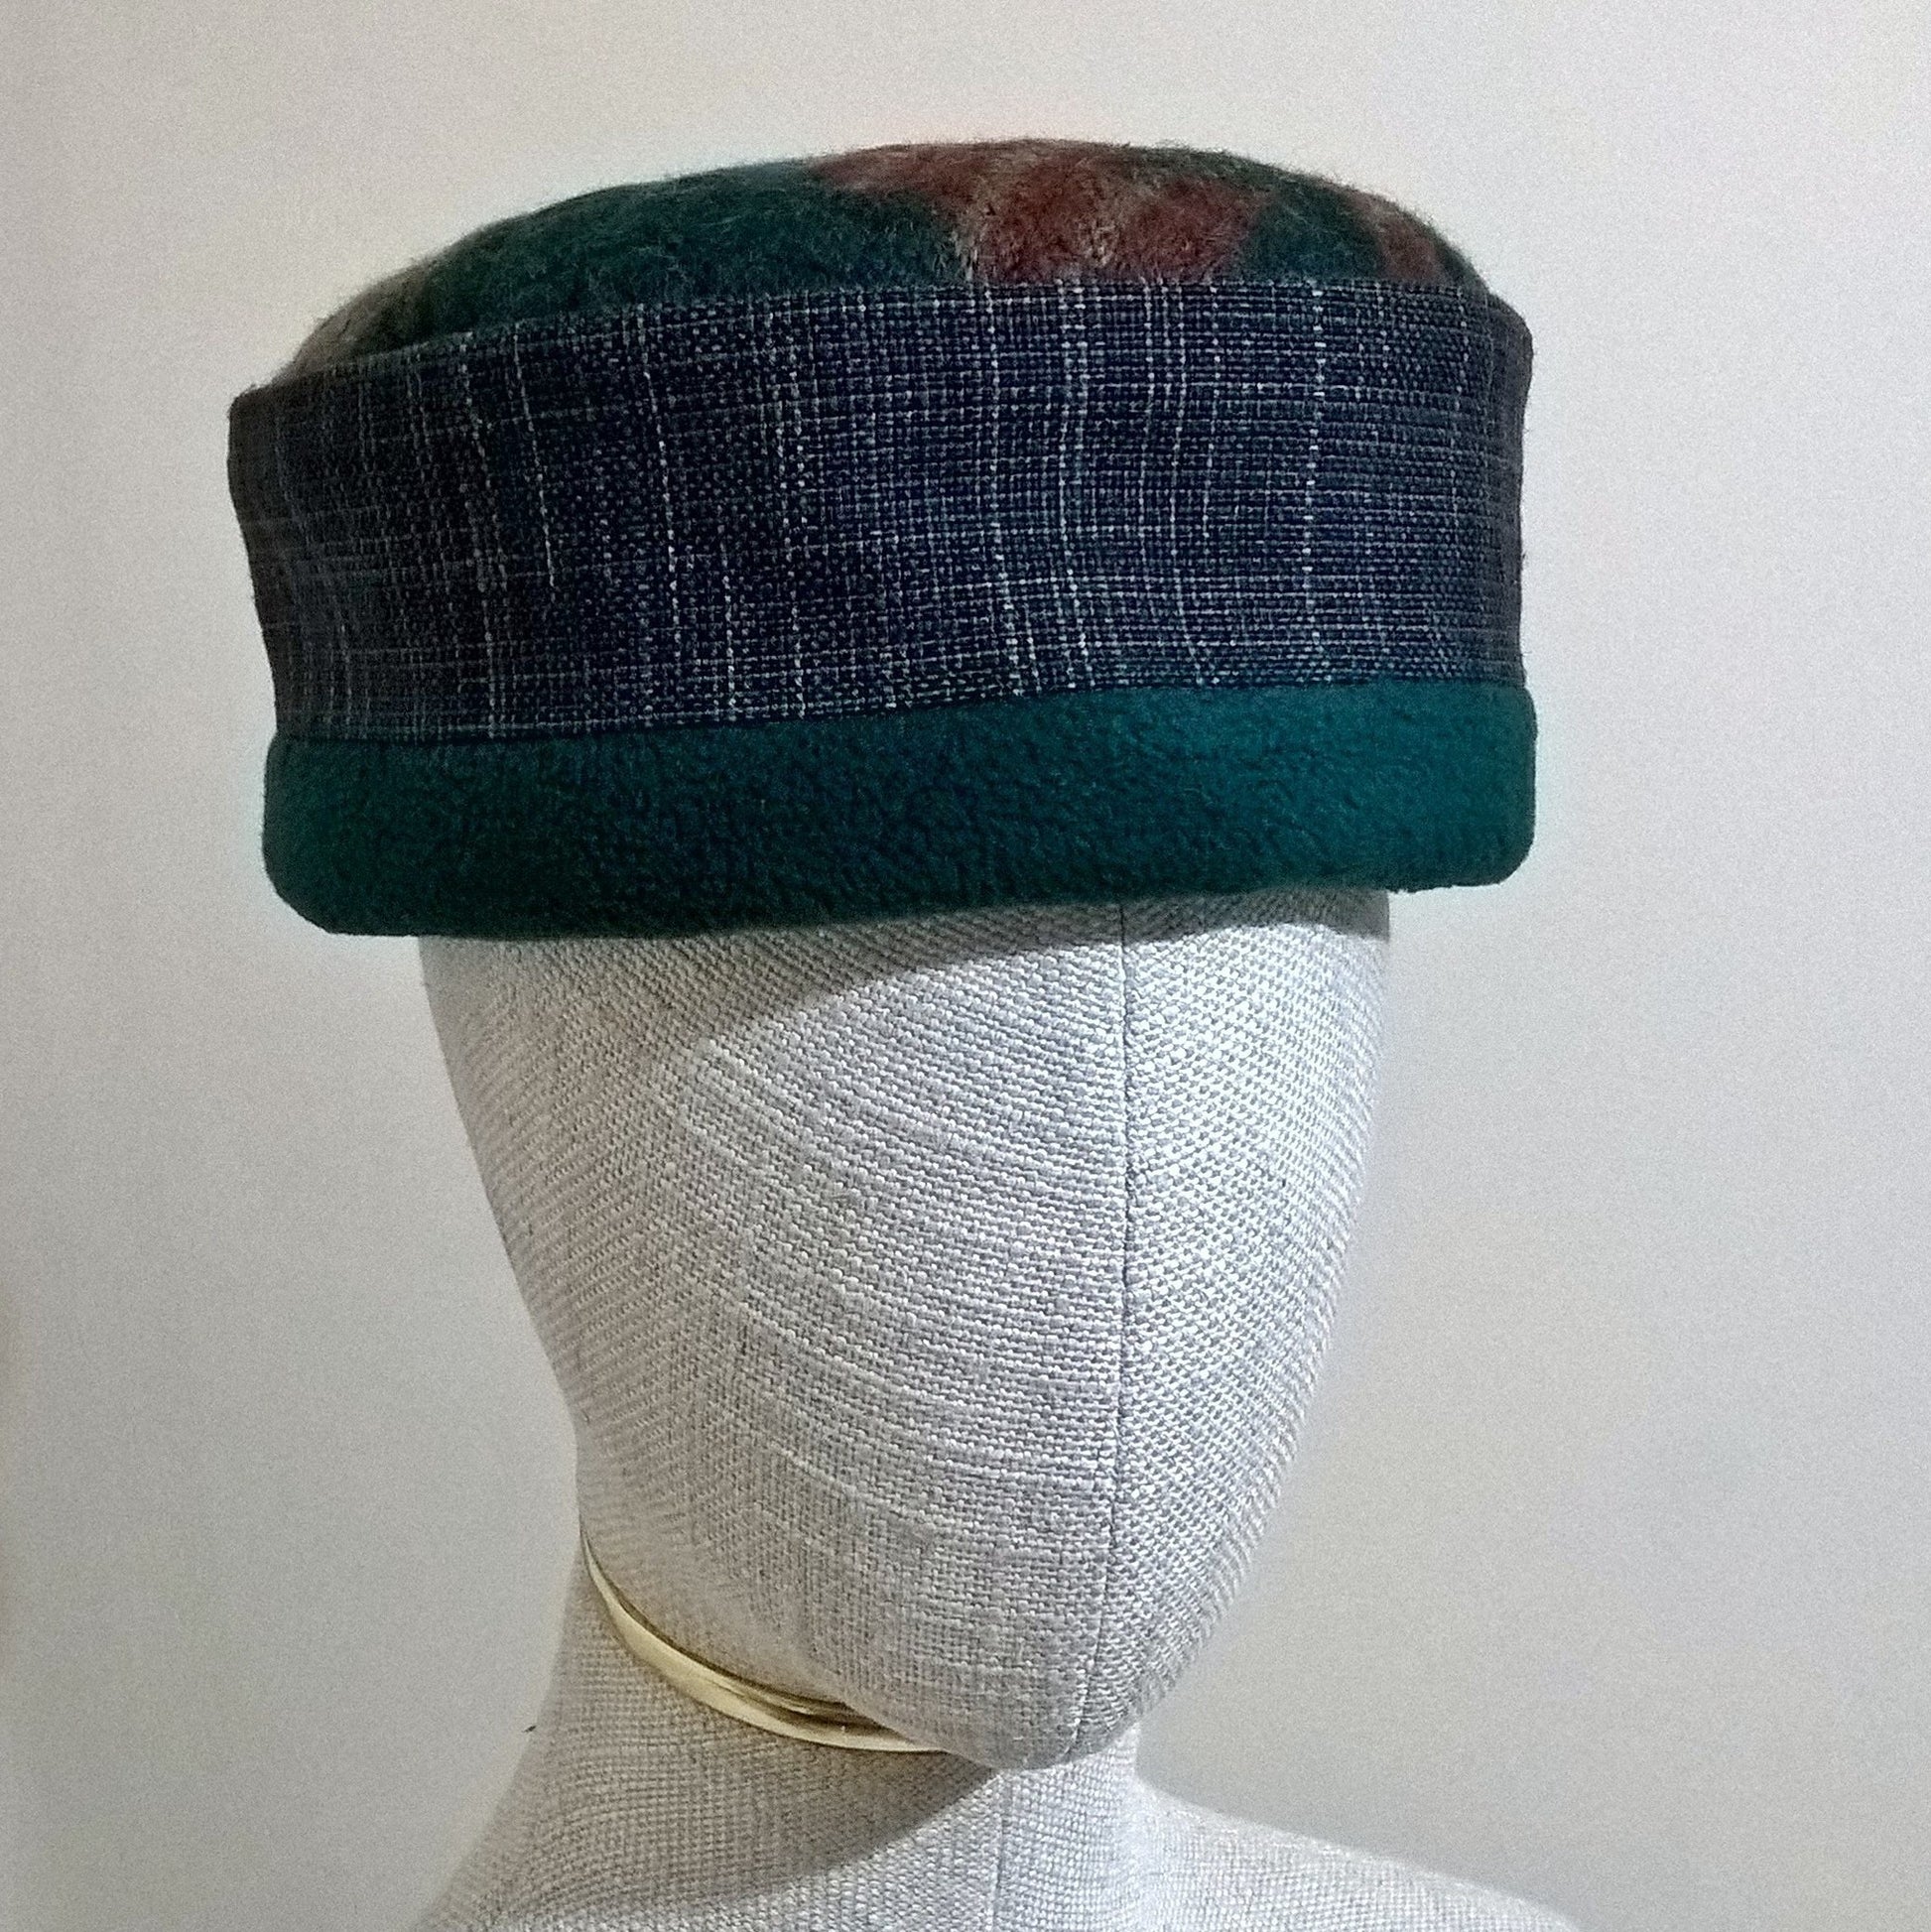 Aztec patterned hat with forest green fleece trim and lining